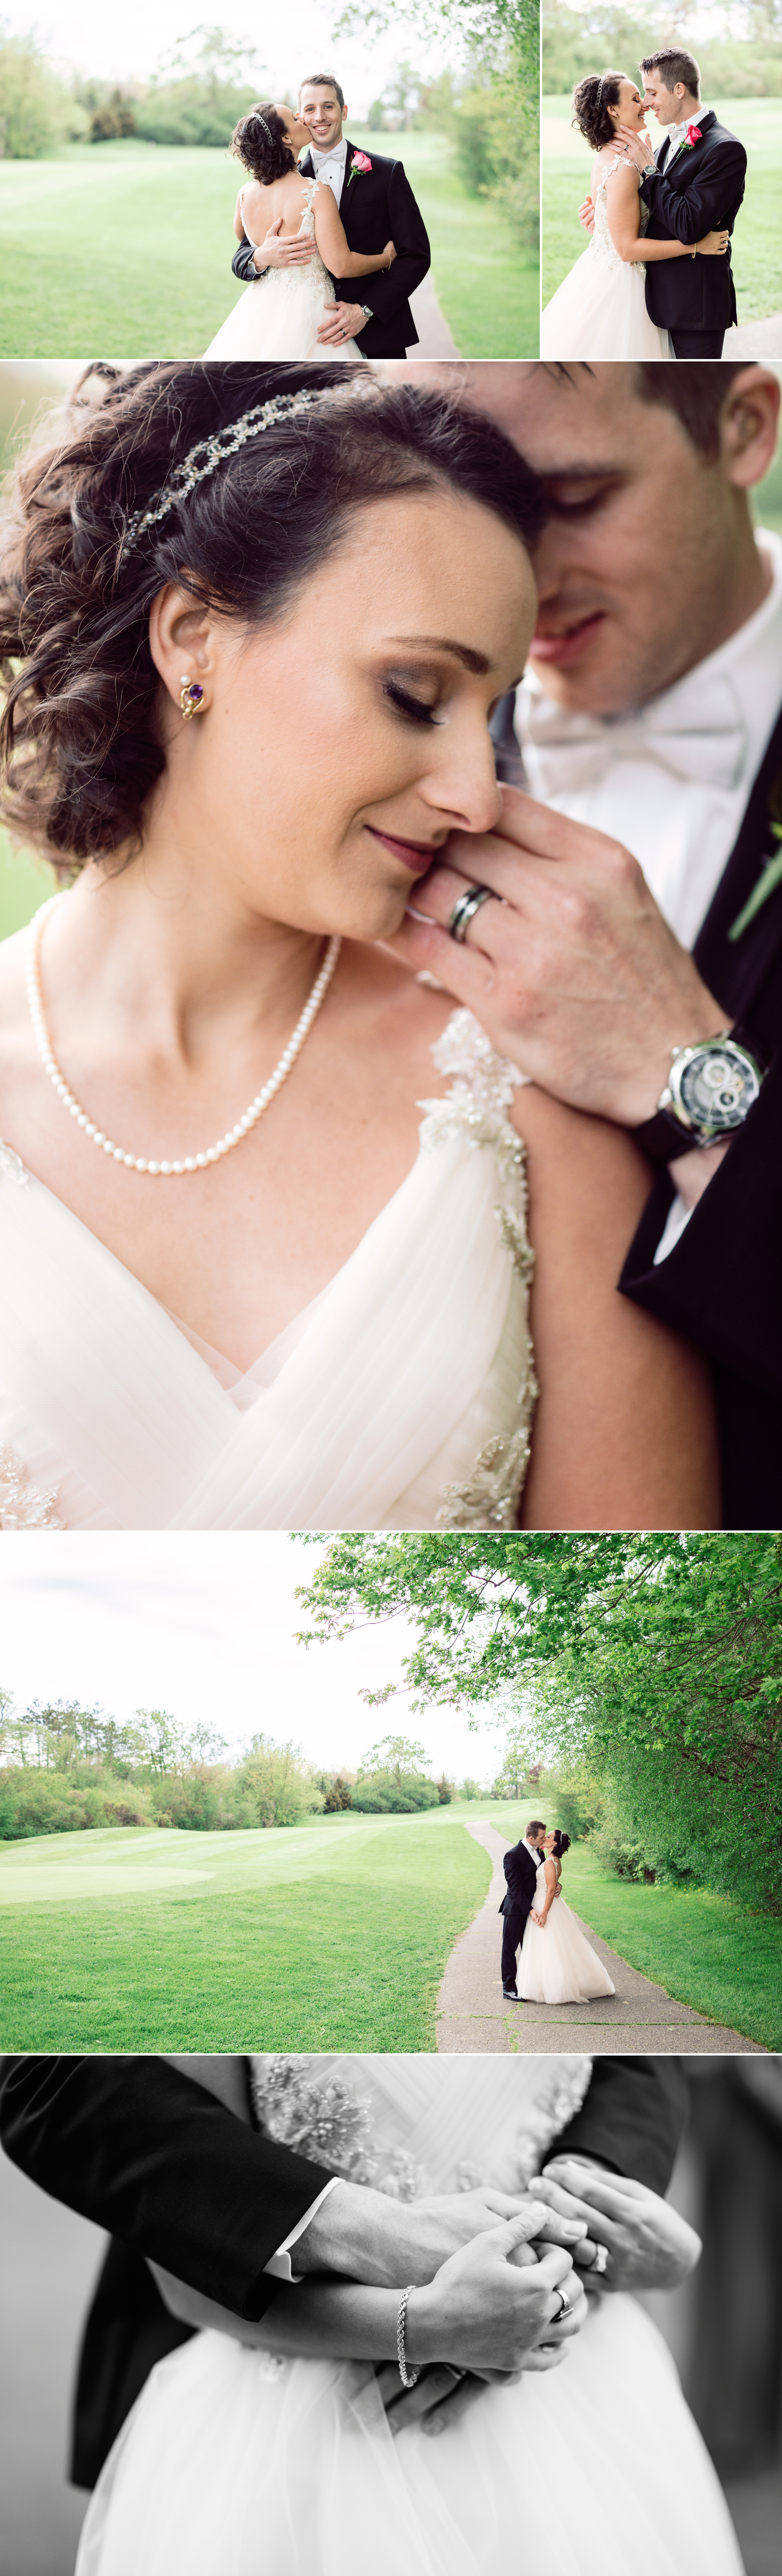 Bride and Groom Portraits at Glen Oaks Country Club Wedding in Livonia Michigan